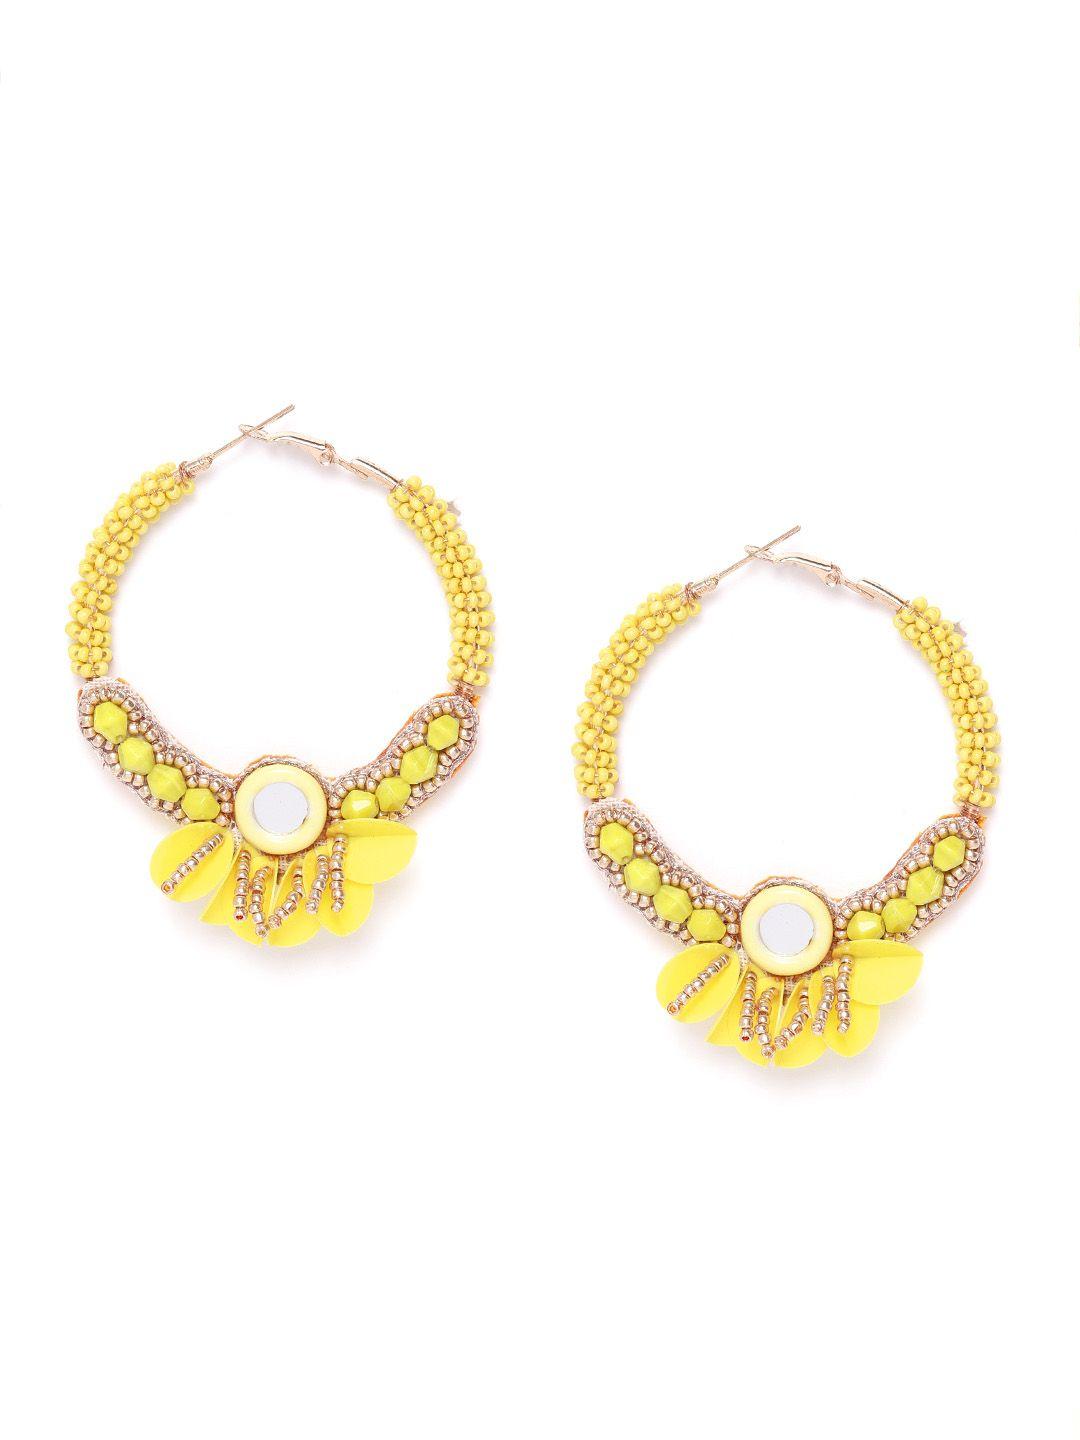 diva walk exclusive yellow & gold-toned beaded mirror detail contemporary hoop earrings